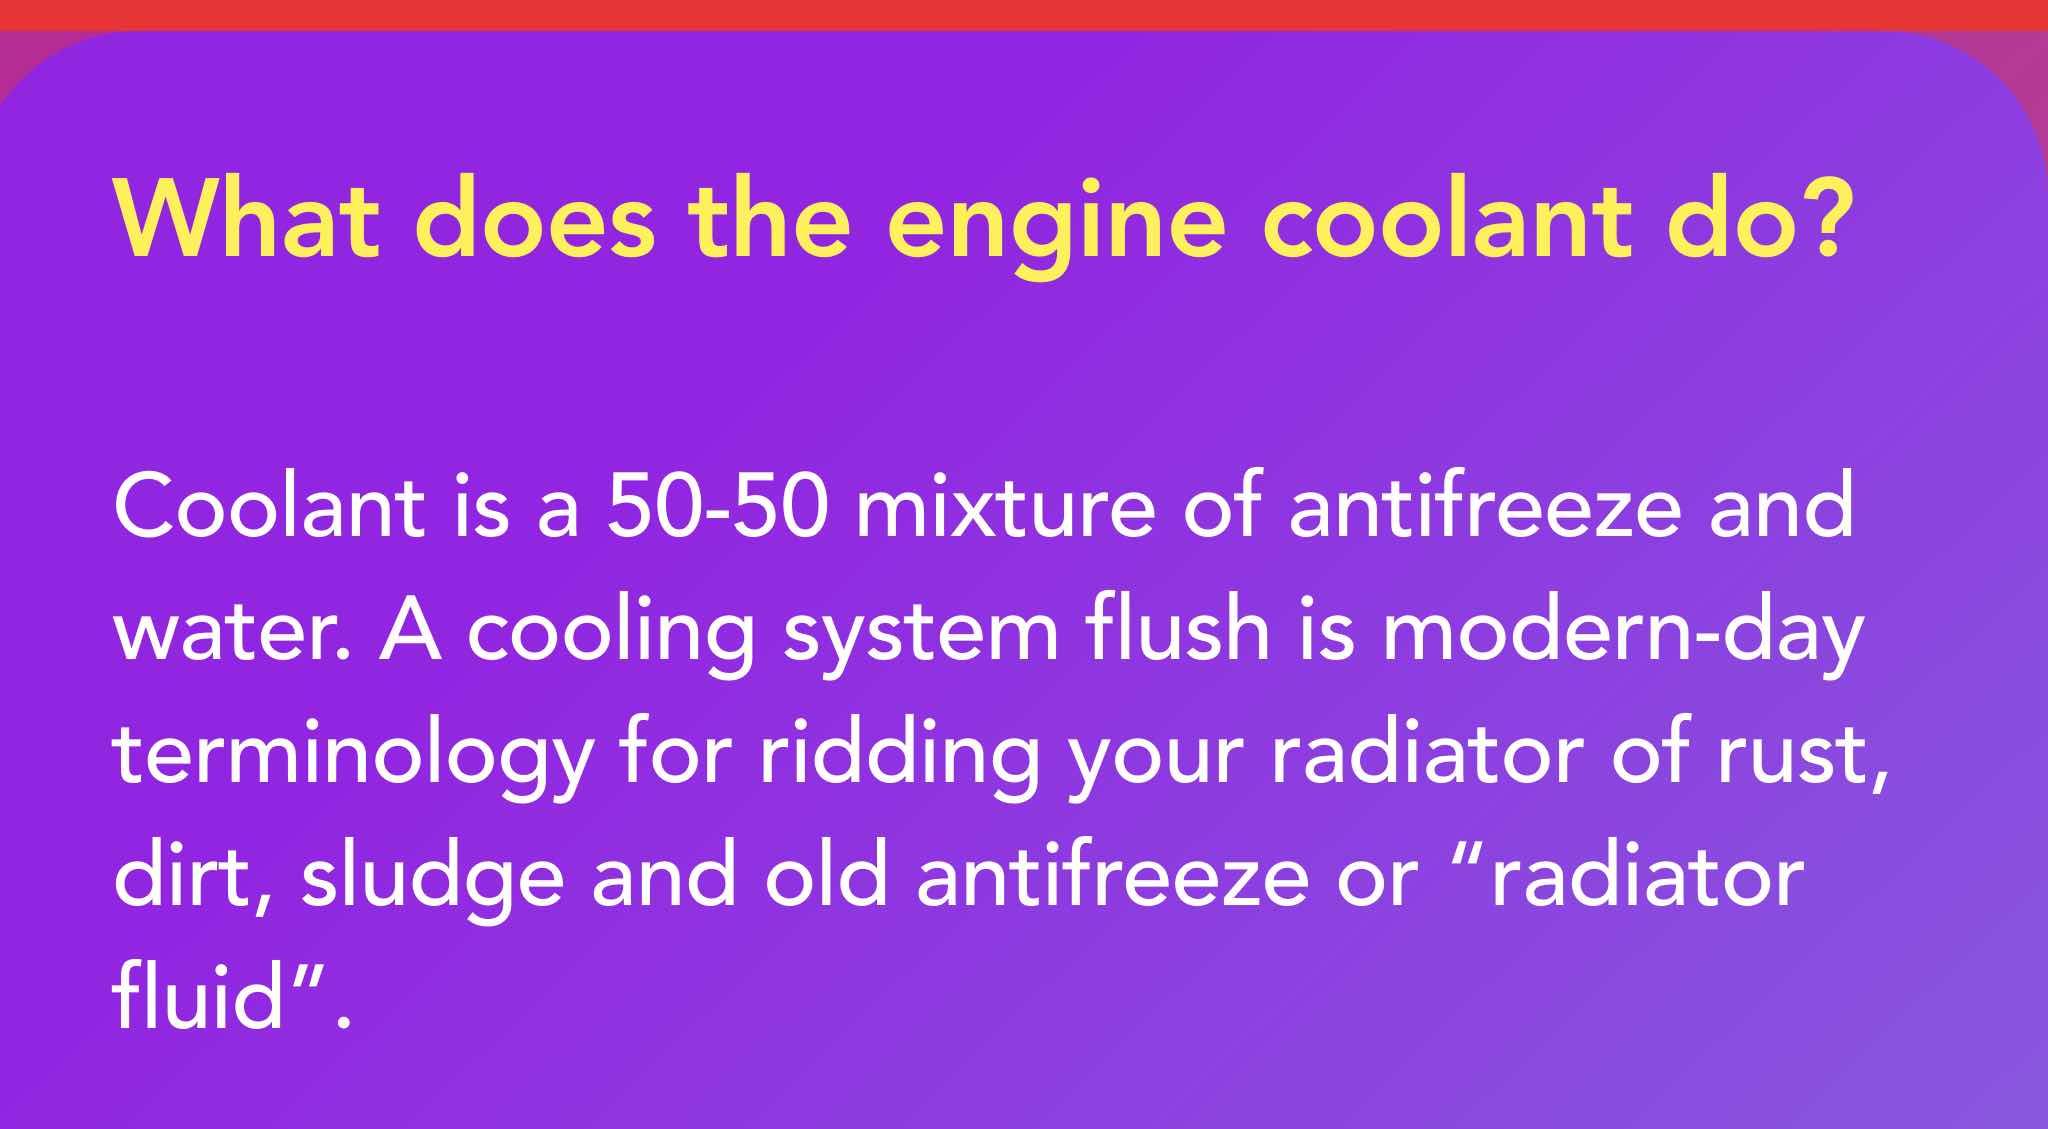 Coolant is a 50-50 mixture of antifreeze and water. A cooling system flush is modern-day terminology for ridding your radiator of rust, dirt, sludge and old antifreeze or “radiator fluid.”